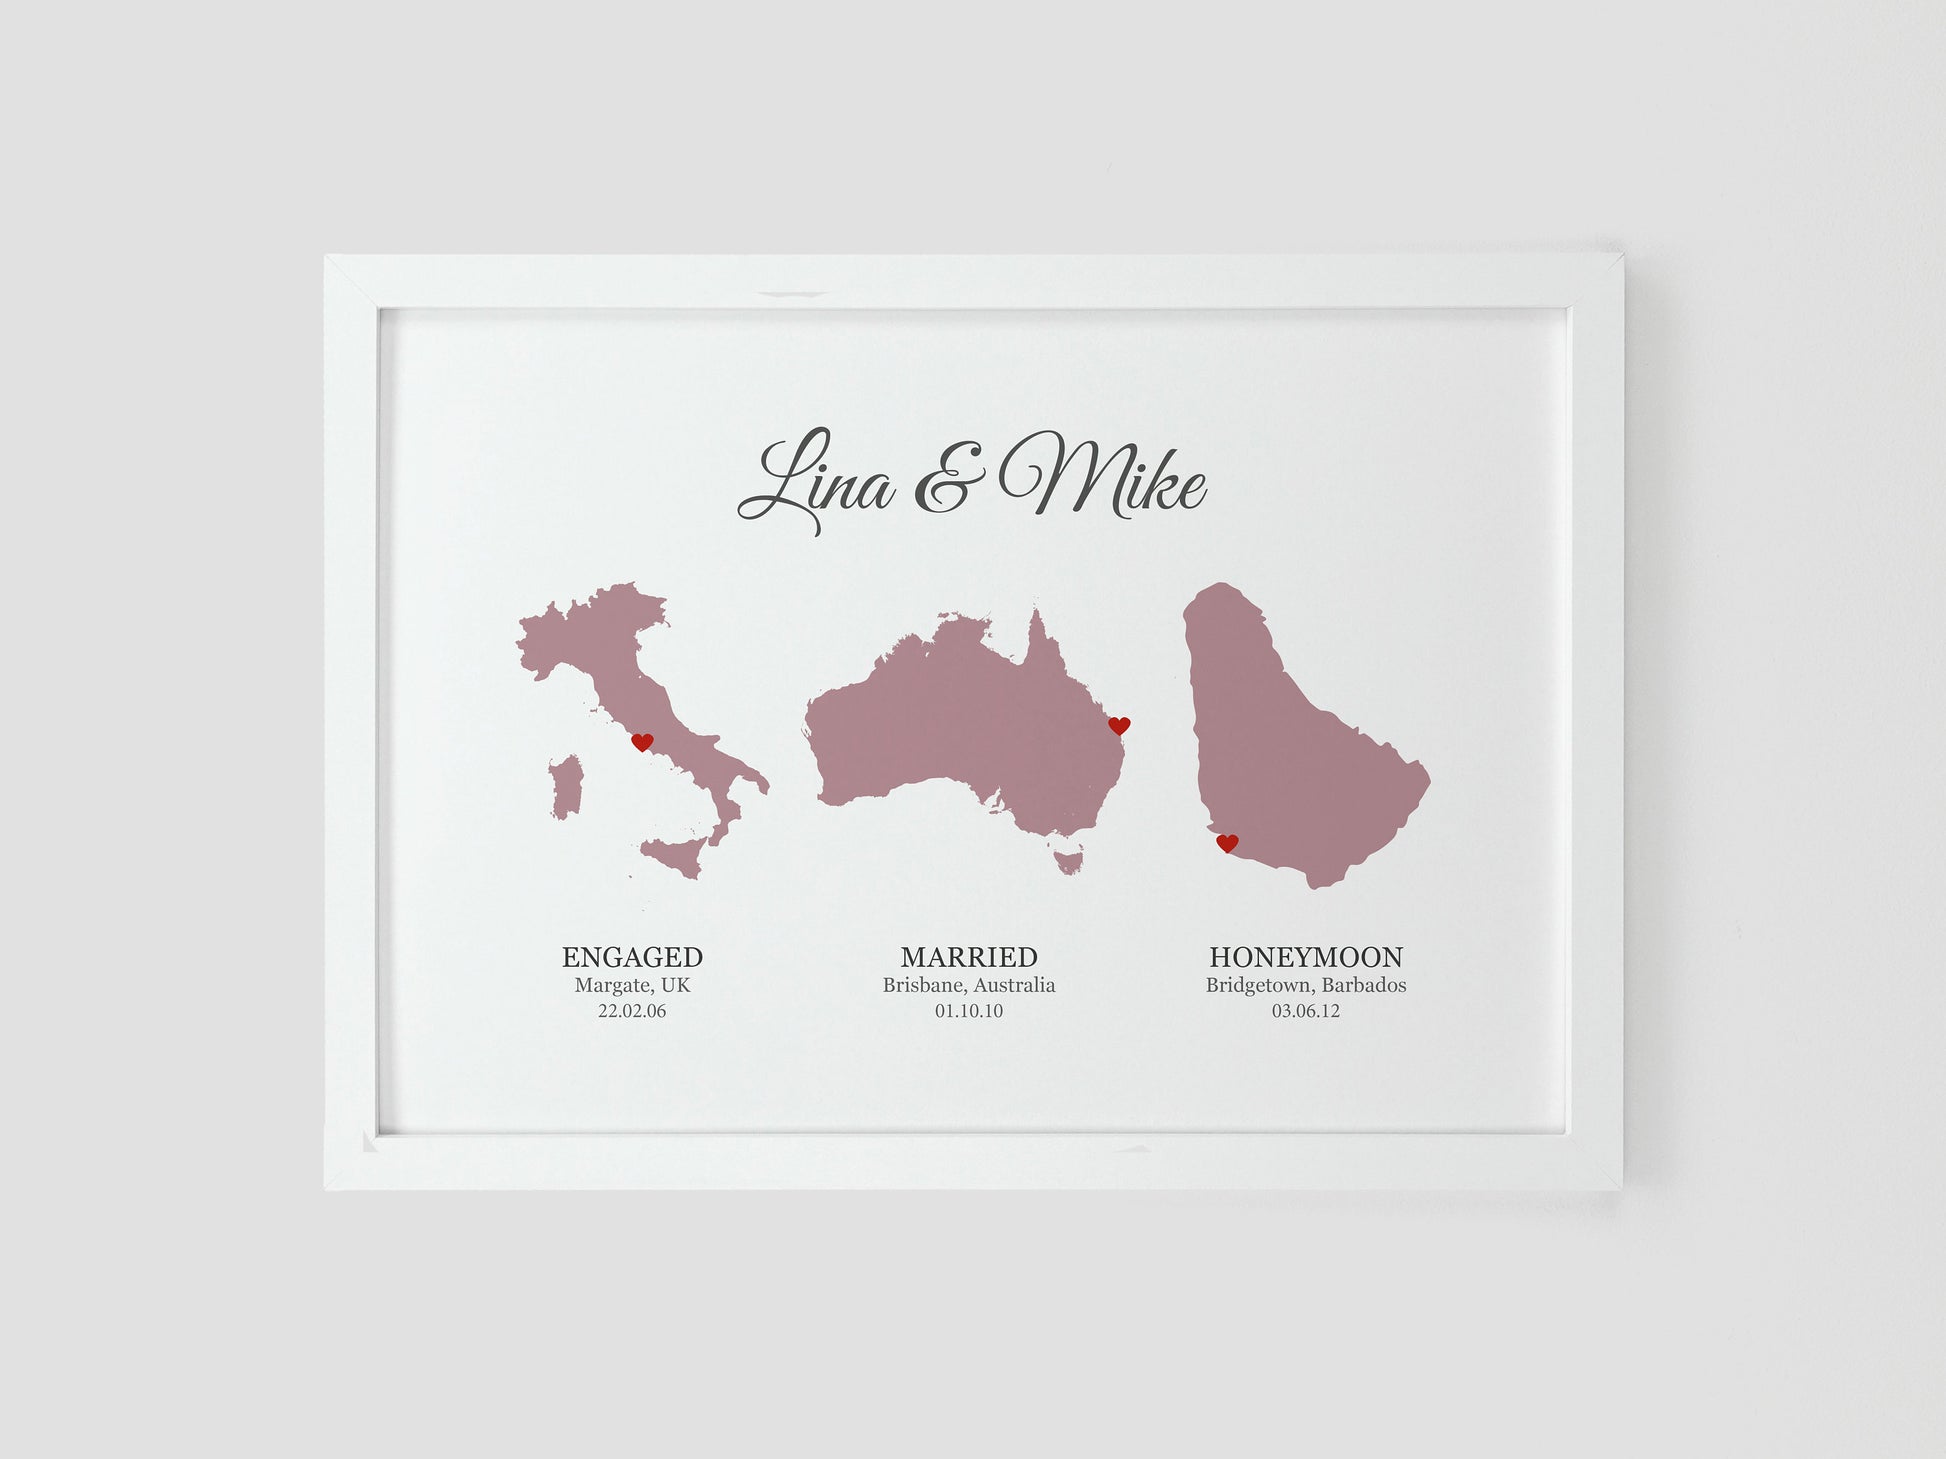 Personalised anniversary gift | Custom wedding gift | Met engaged married maps | Gift for couple, wife, husband | Paper anniversary VA031